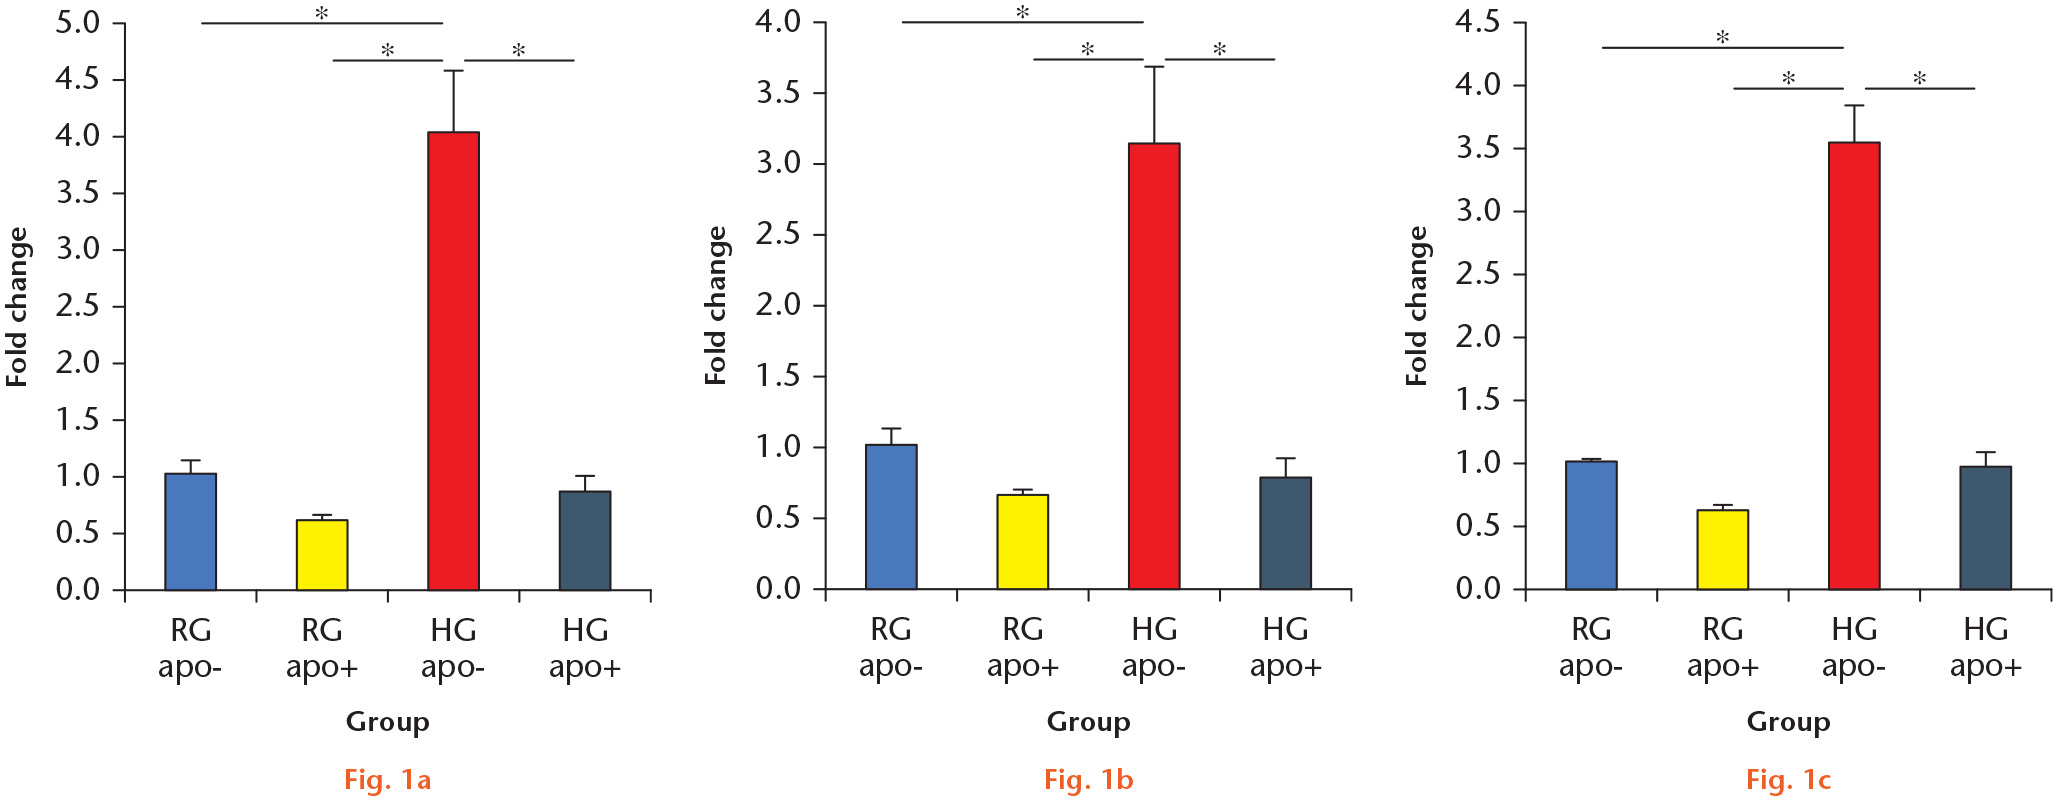  
            a) Expression of nicotinamide adenine dinucleotide phosphate oxidase 1 (NOX1) messenger RNA (mRNA) in the high-glucose without apocynin (HG apo–) group was significantly higher than that in the regular-glucose without apocynin (RG apo–) and regular-glucose with apocynin (RG apo+) groups at 48 hours. Its expression in the high-glucose with apocynin (HG apo+) group was significantly lower than that in the HG apo– group. However, there was no difference within the regular-glucose (RG) groups. b) Expression of NOX4 mRNA, and c) Expression of interleukin-6 (IL-6) mRNA showed similar findings to that of NOX1. *p < 0.05.
          